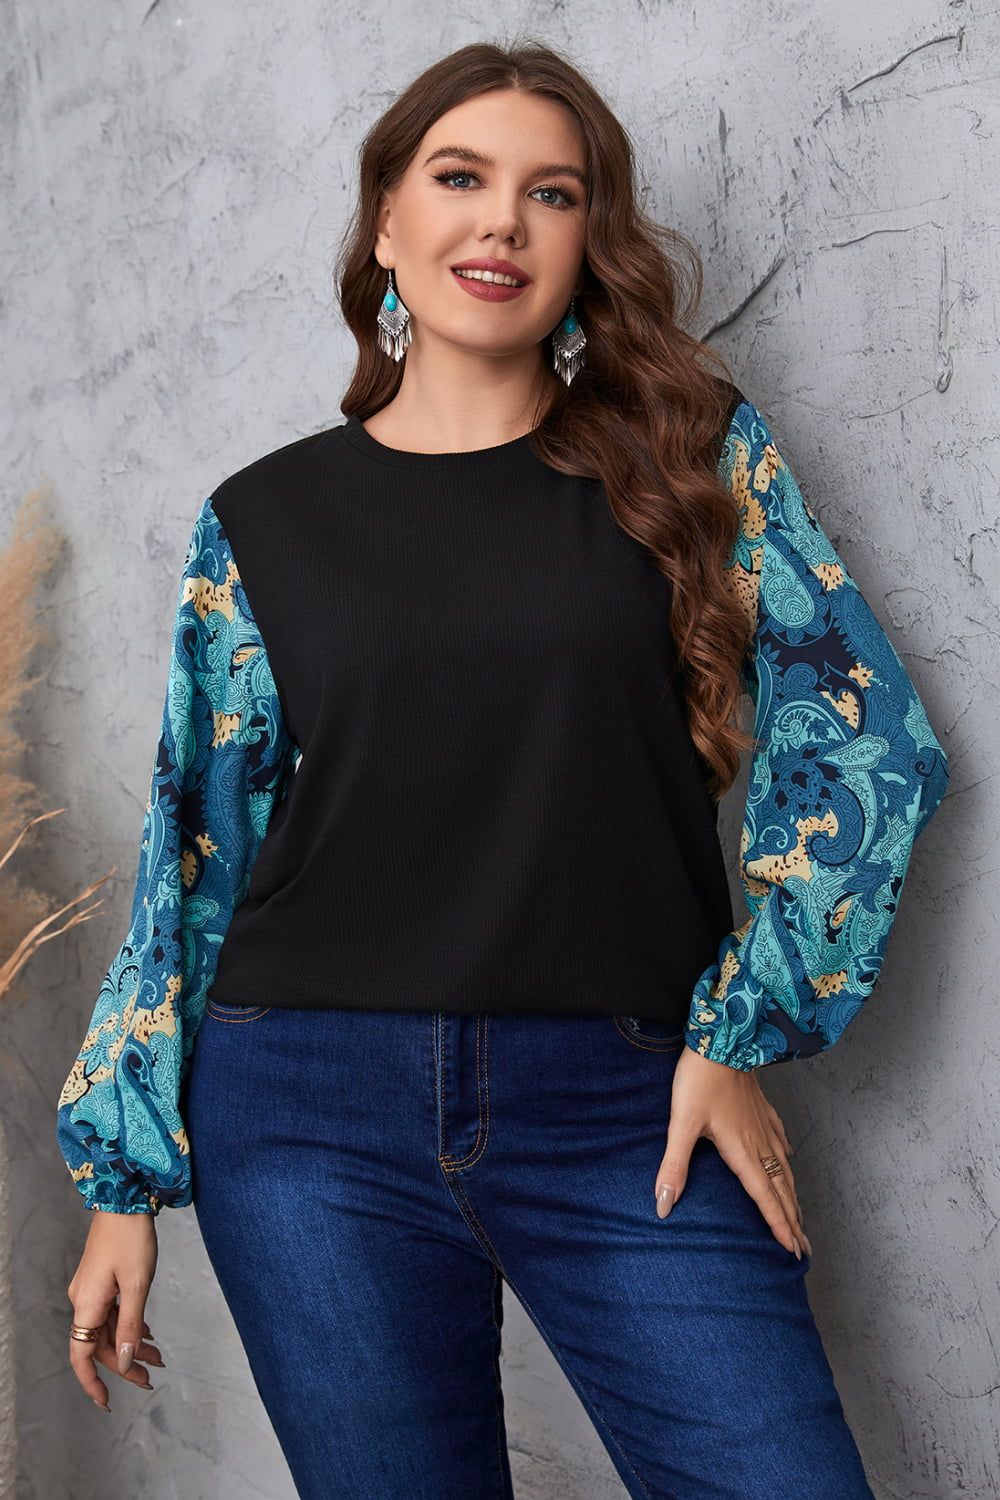 Melo Apparel Plus Size Printed Sleeve Round Neck Blouse.